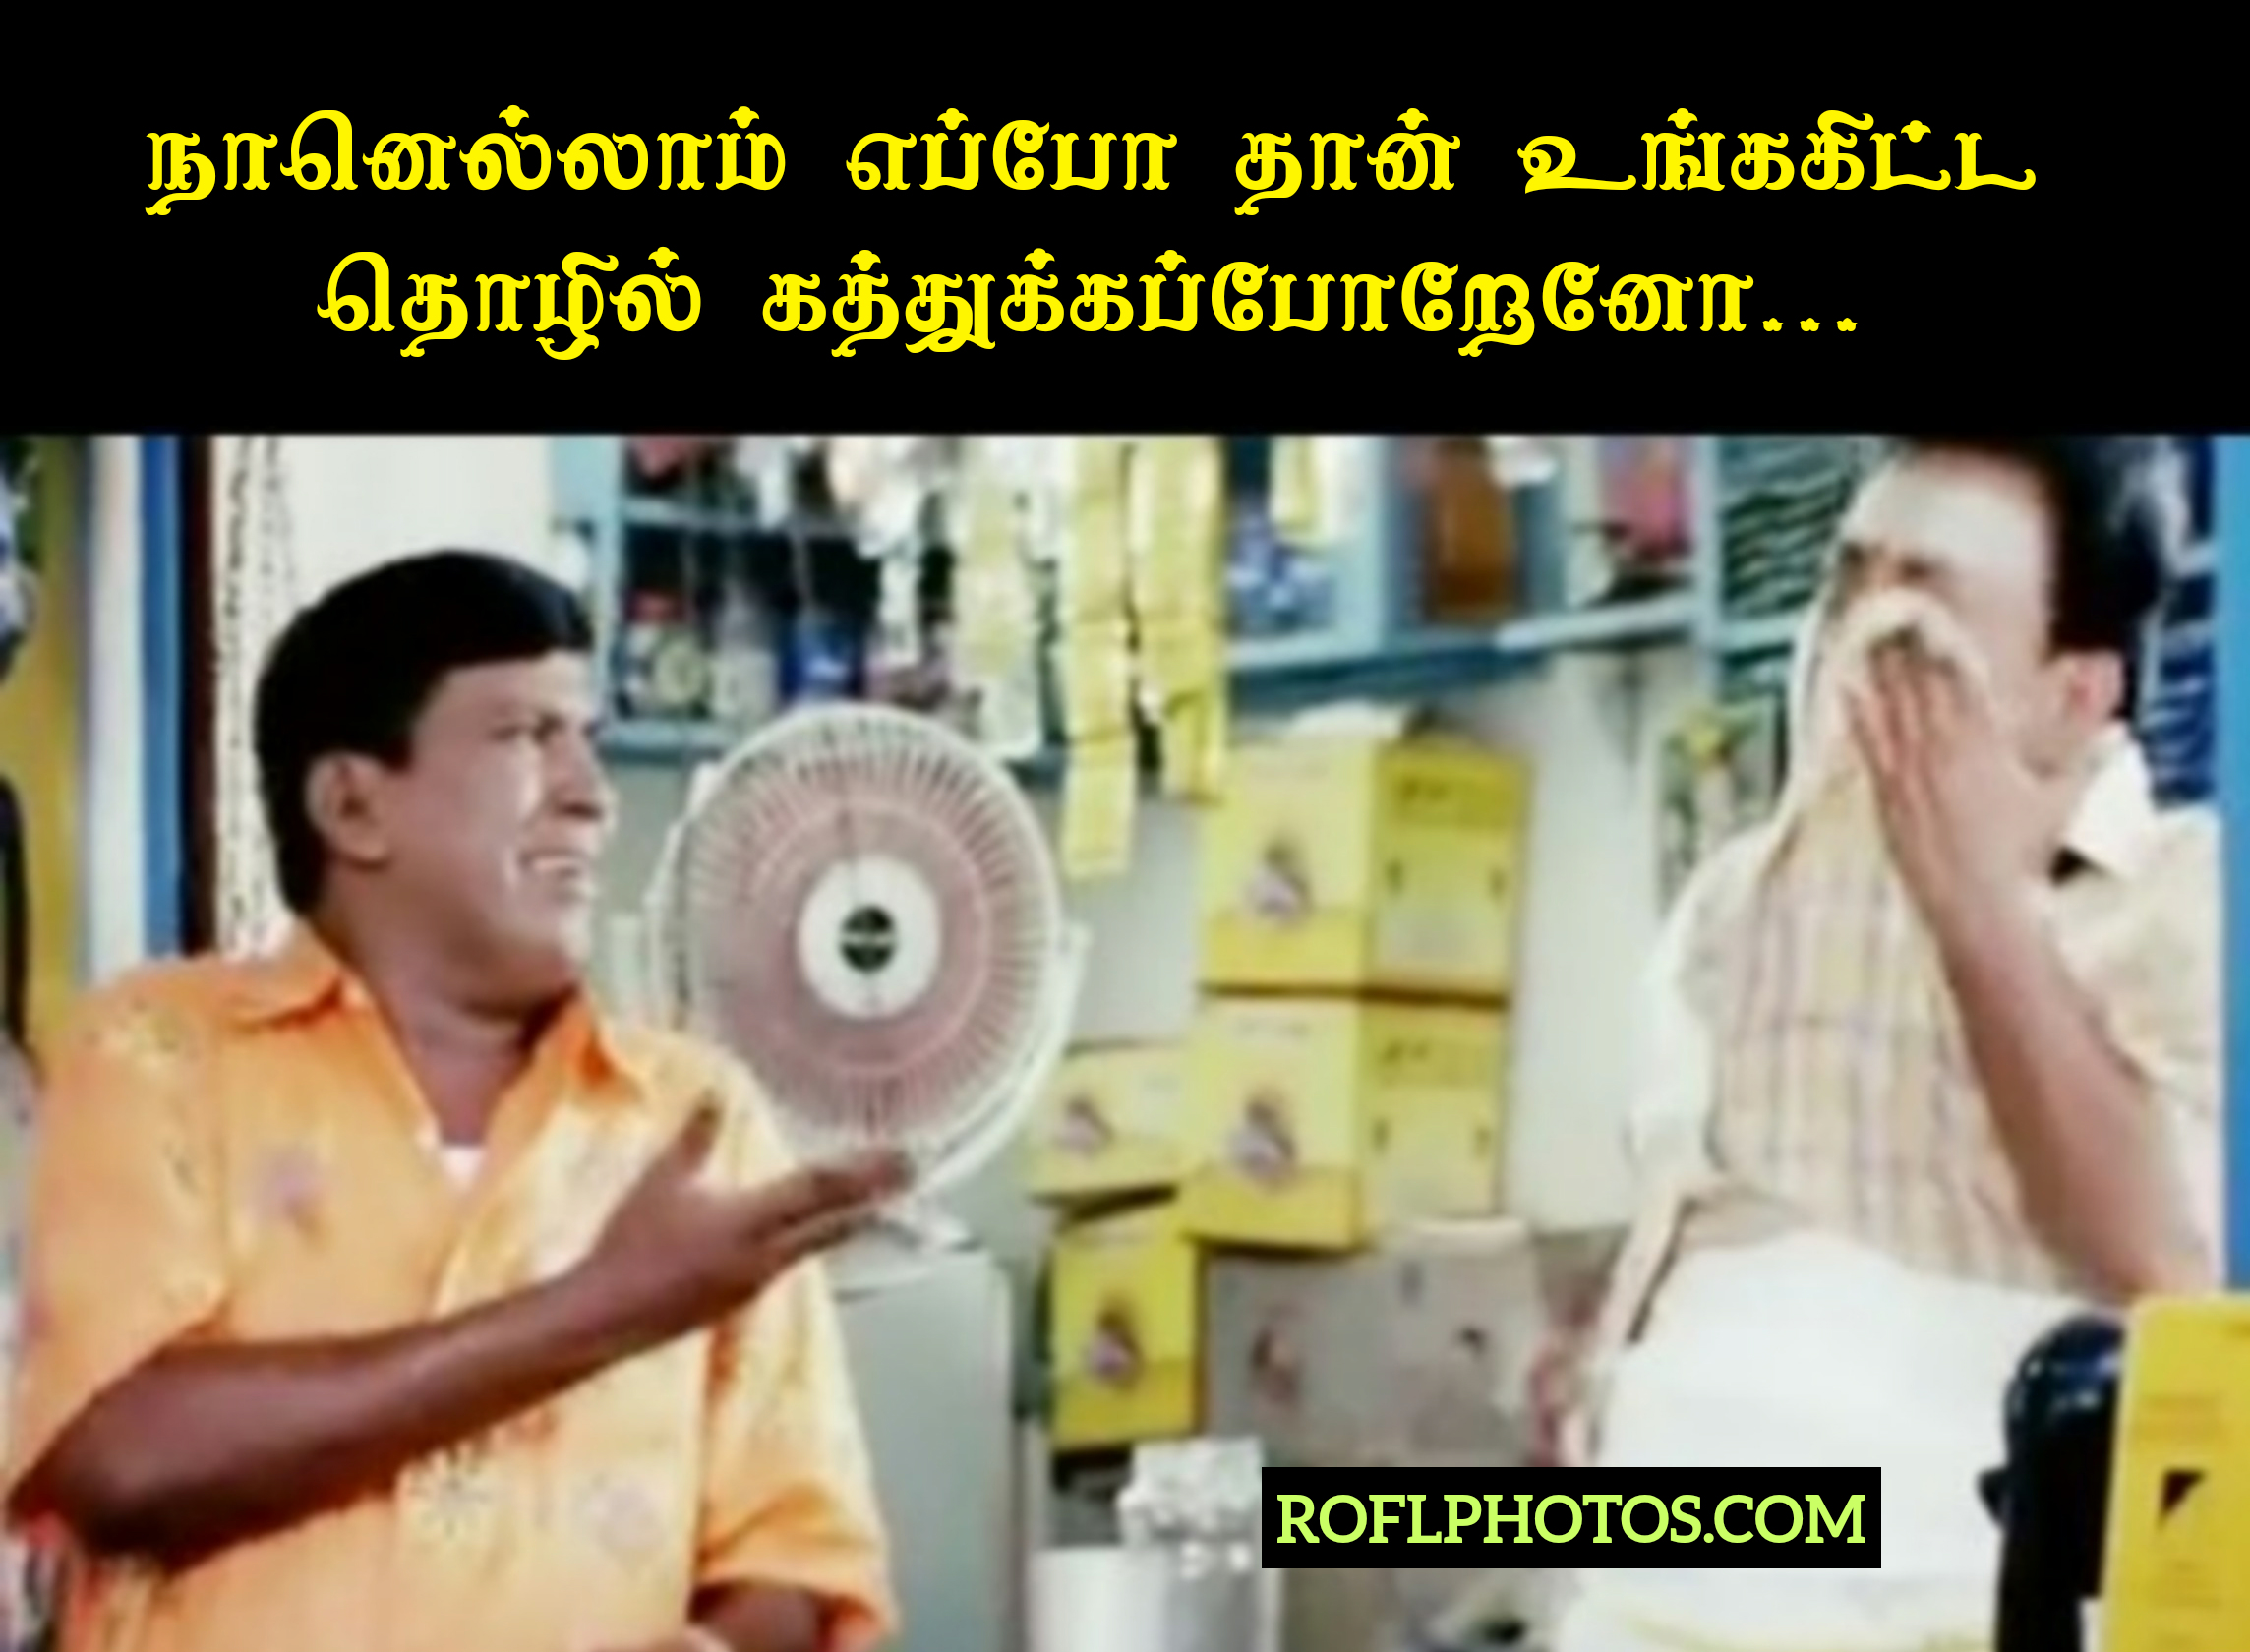 Tamil Comedy Memes Crying Memes Tamil Comedy Photos With Text Tamil Funny Images With Dialogues Tamil Photo Comments Download Roflphotos Com Rofl Photos Com